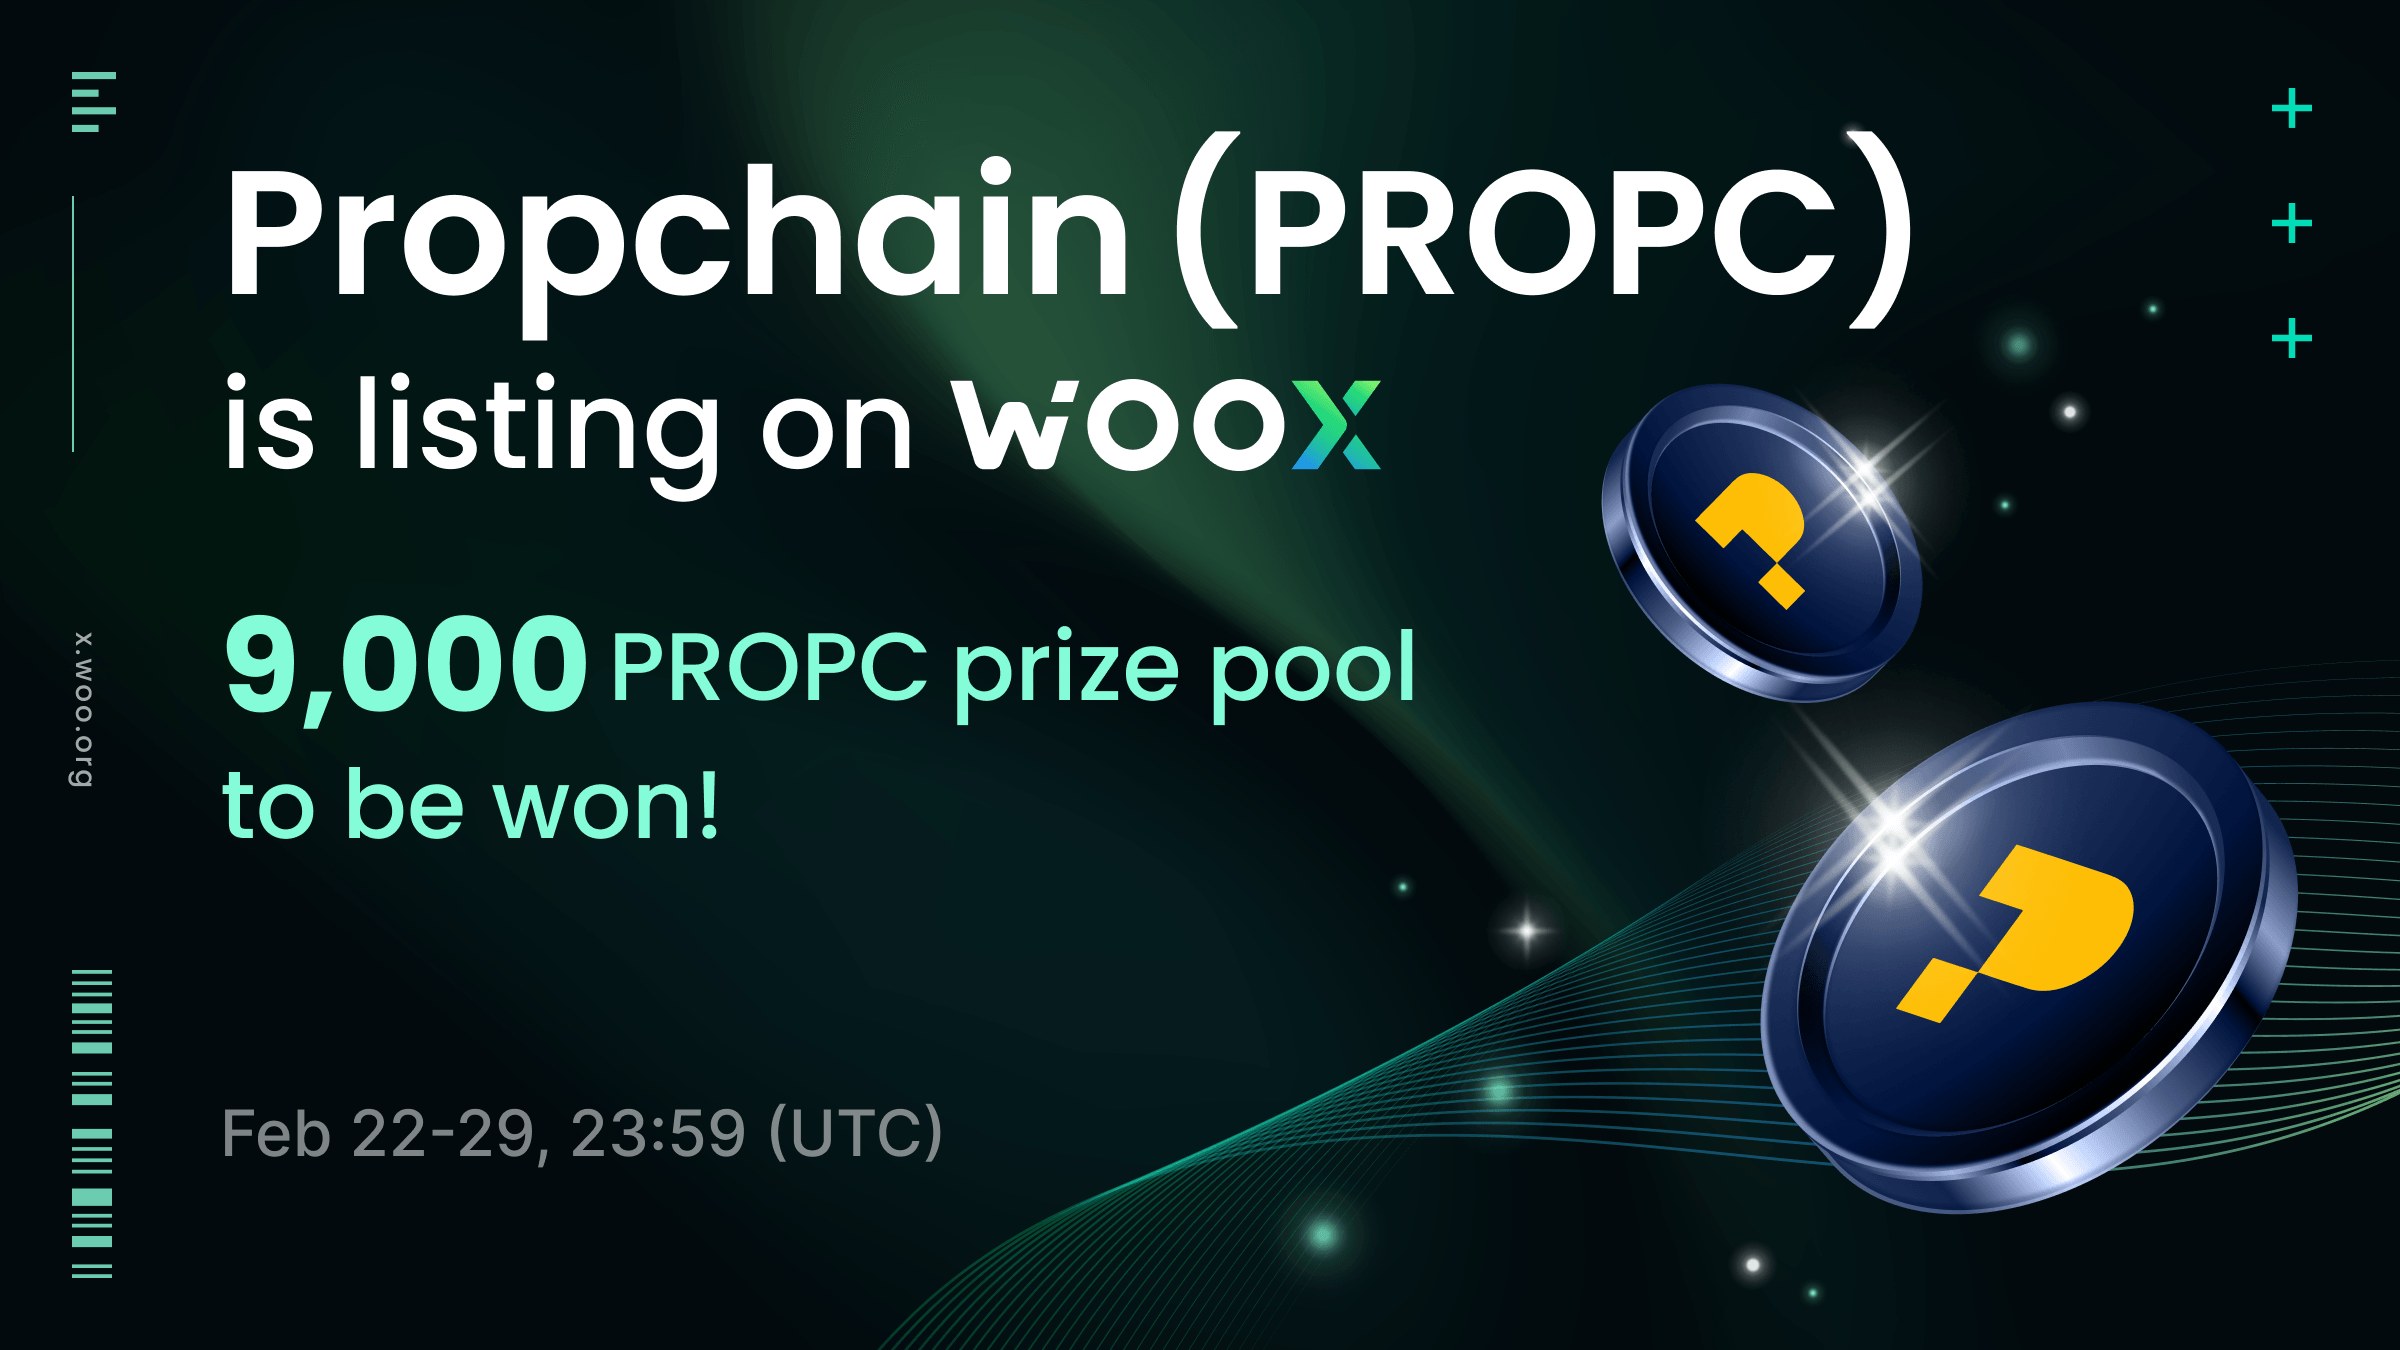 Propchain Listing on WOO X - Share a 9,000 PROPC prize pool !